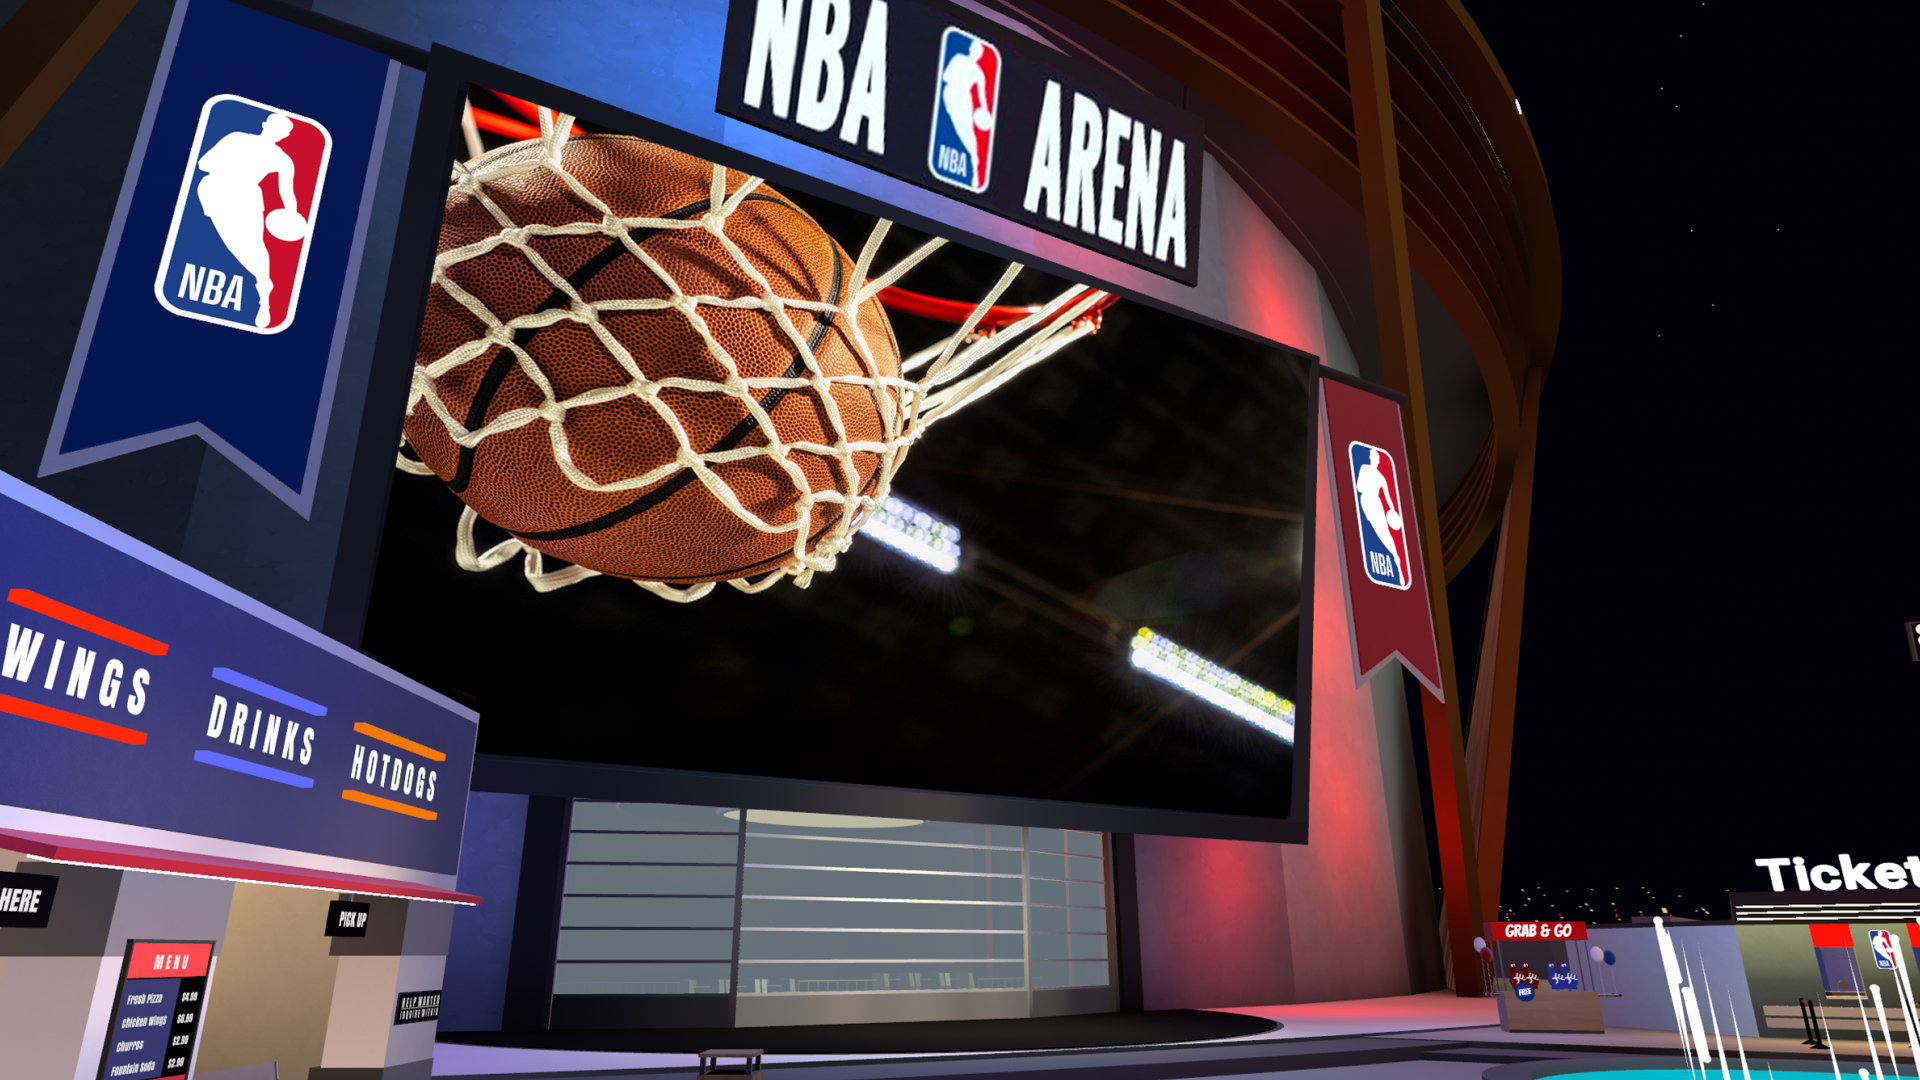 A large screen showing a basketball match, in a virtual NBA stadium complete with a food stand and ticket booth